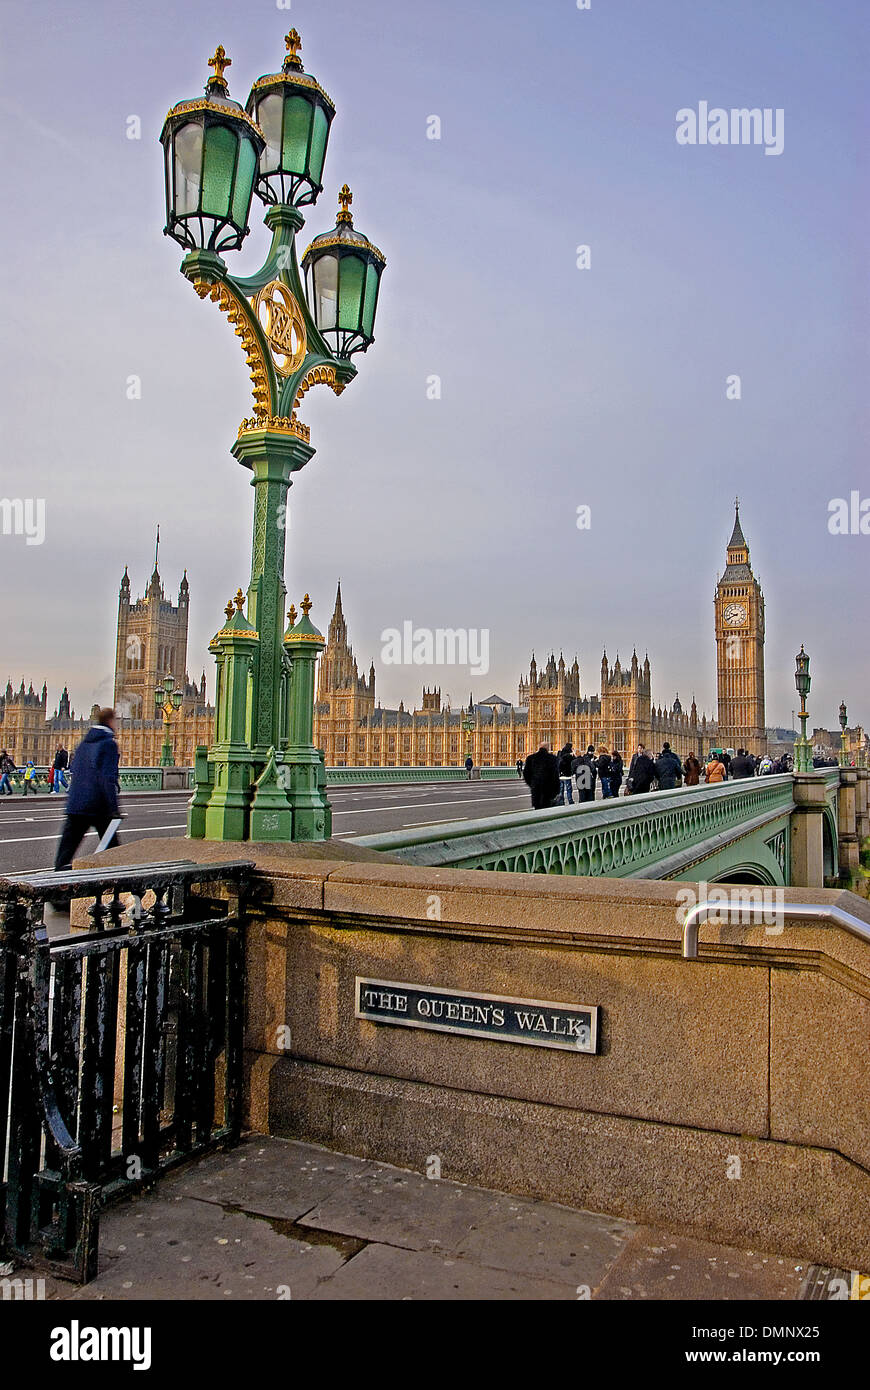 Big Ben, The Palace of Westminster and River Thames are iconic destinations in the heart of London. Stock Photo